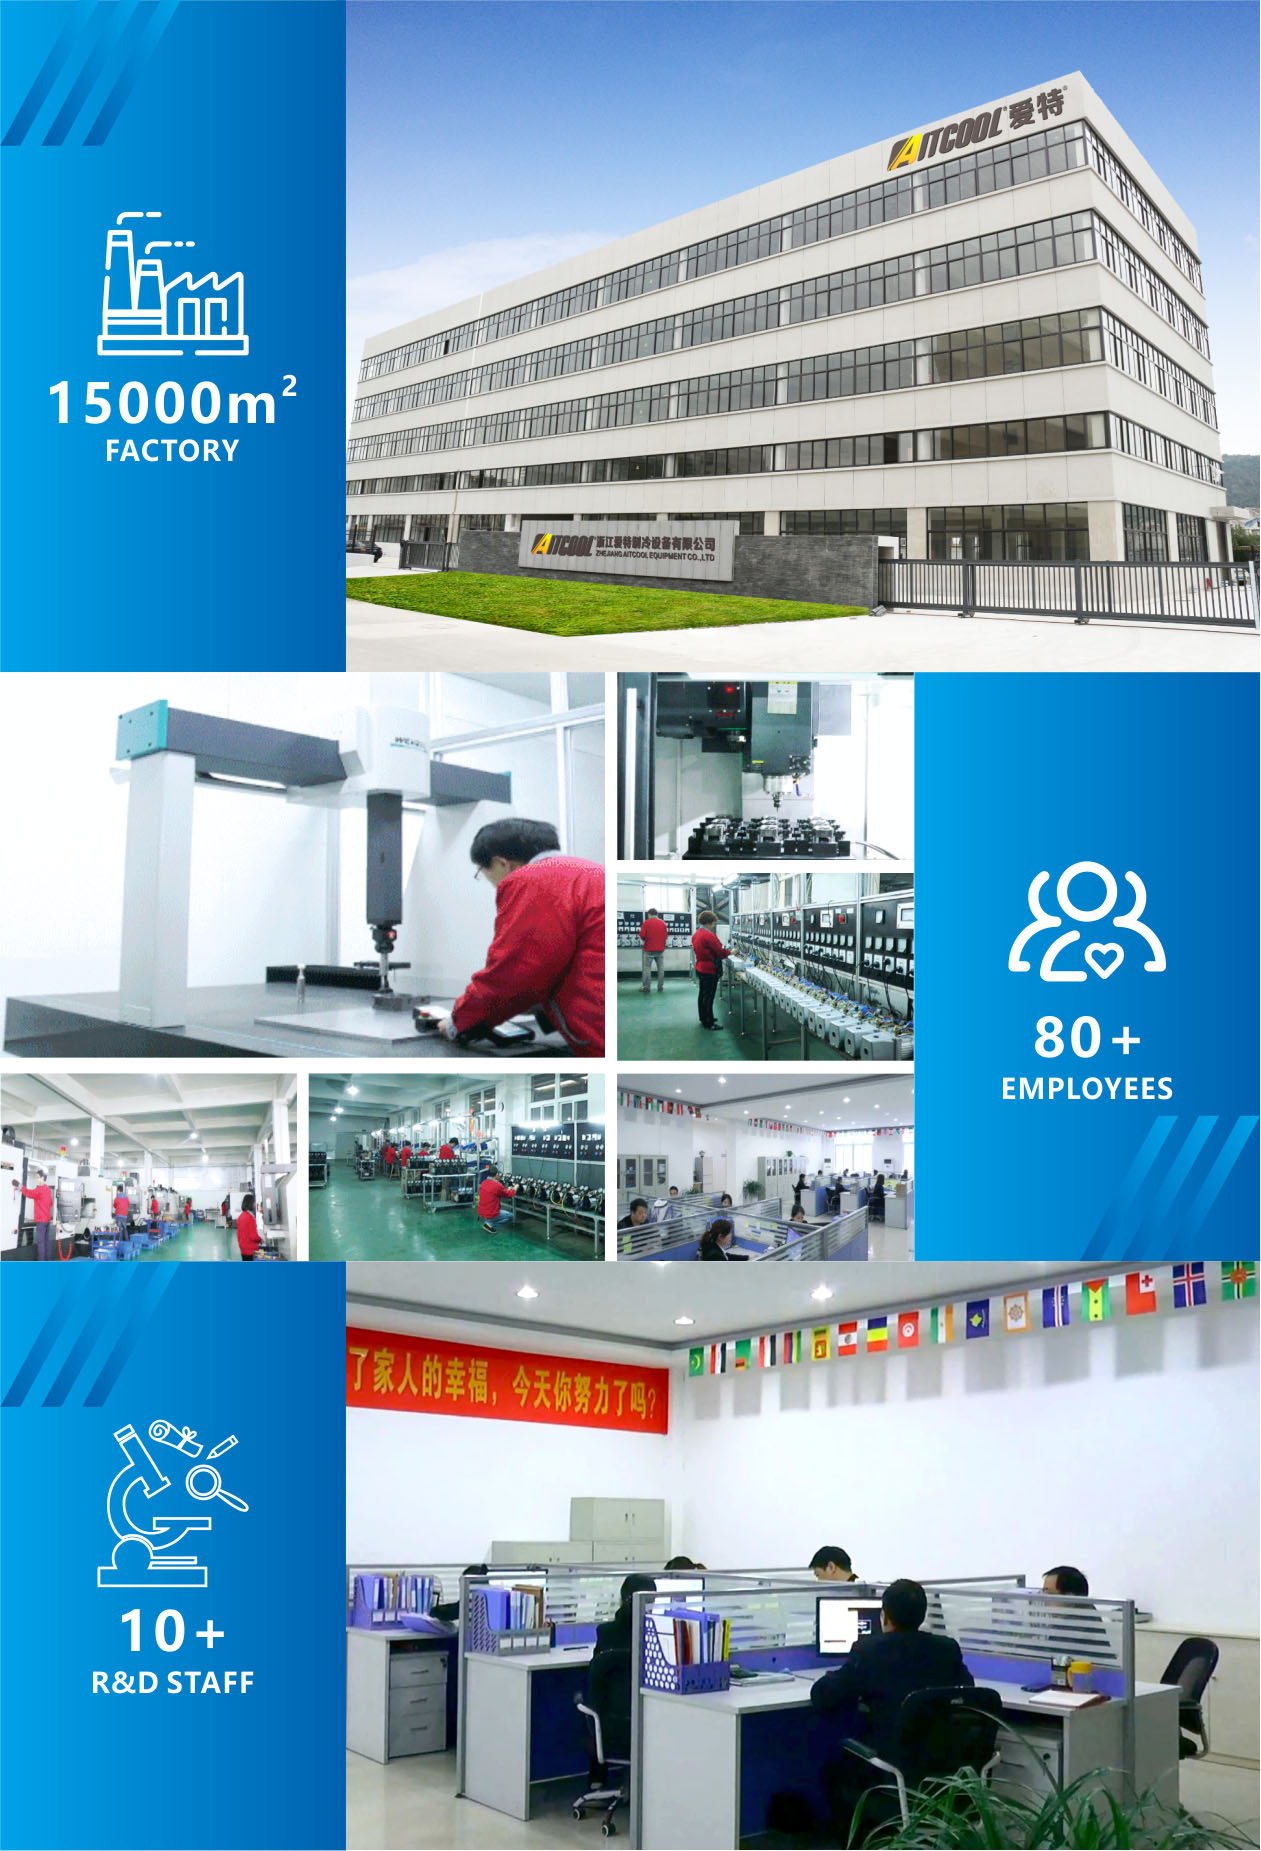 15000 meter square factory, 80+ employees and 10+ R&D Staff